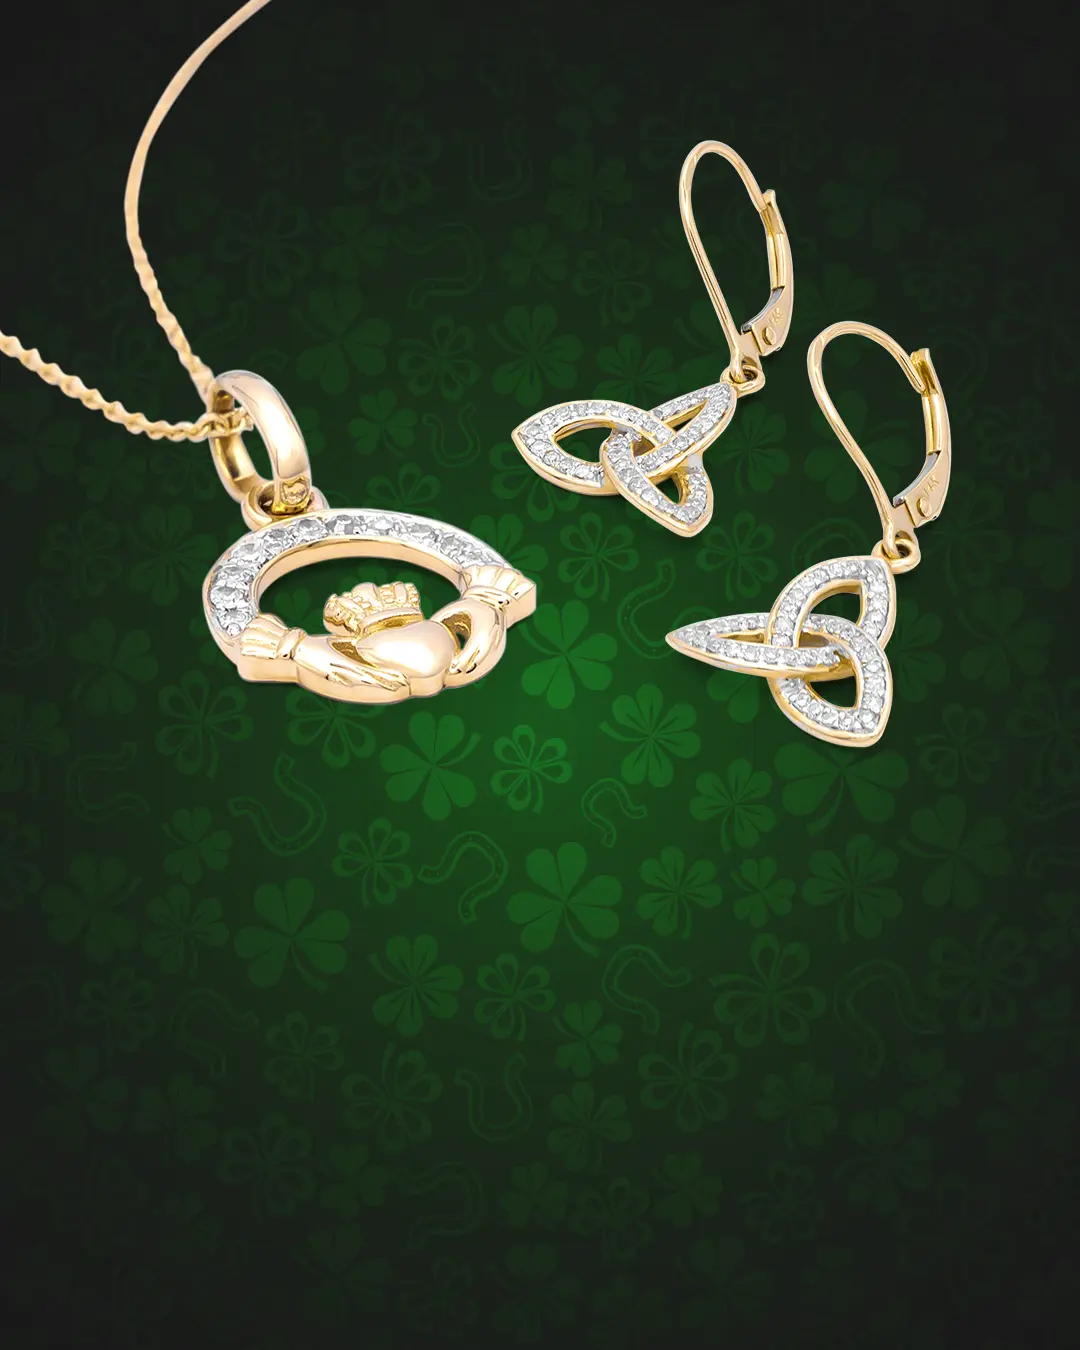 Shop our wide selection of traditional Irish jewelry 2